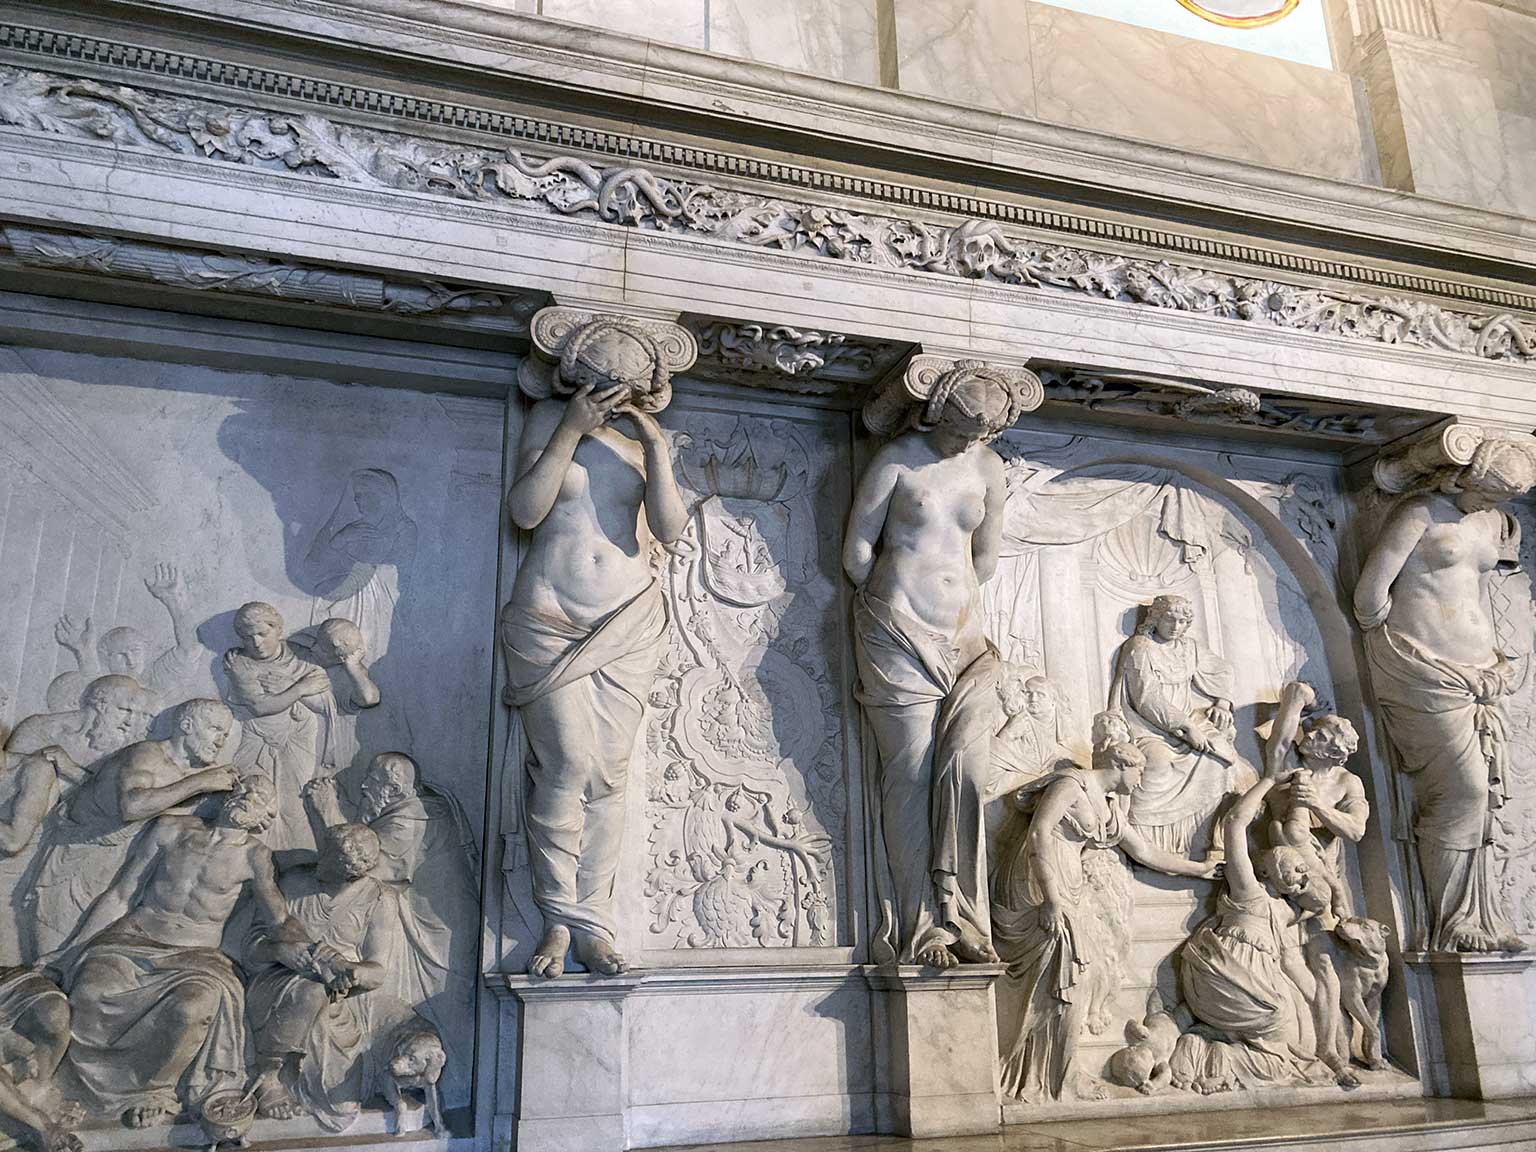 Female figures and reliefs by Artus Quellinus, Vierschaar, palace on Dam square, Amsterdam